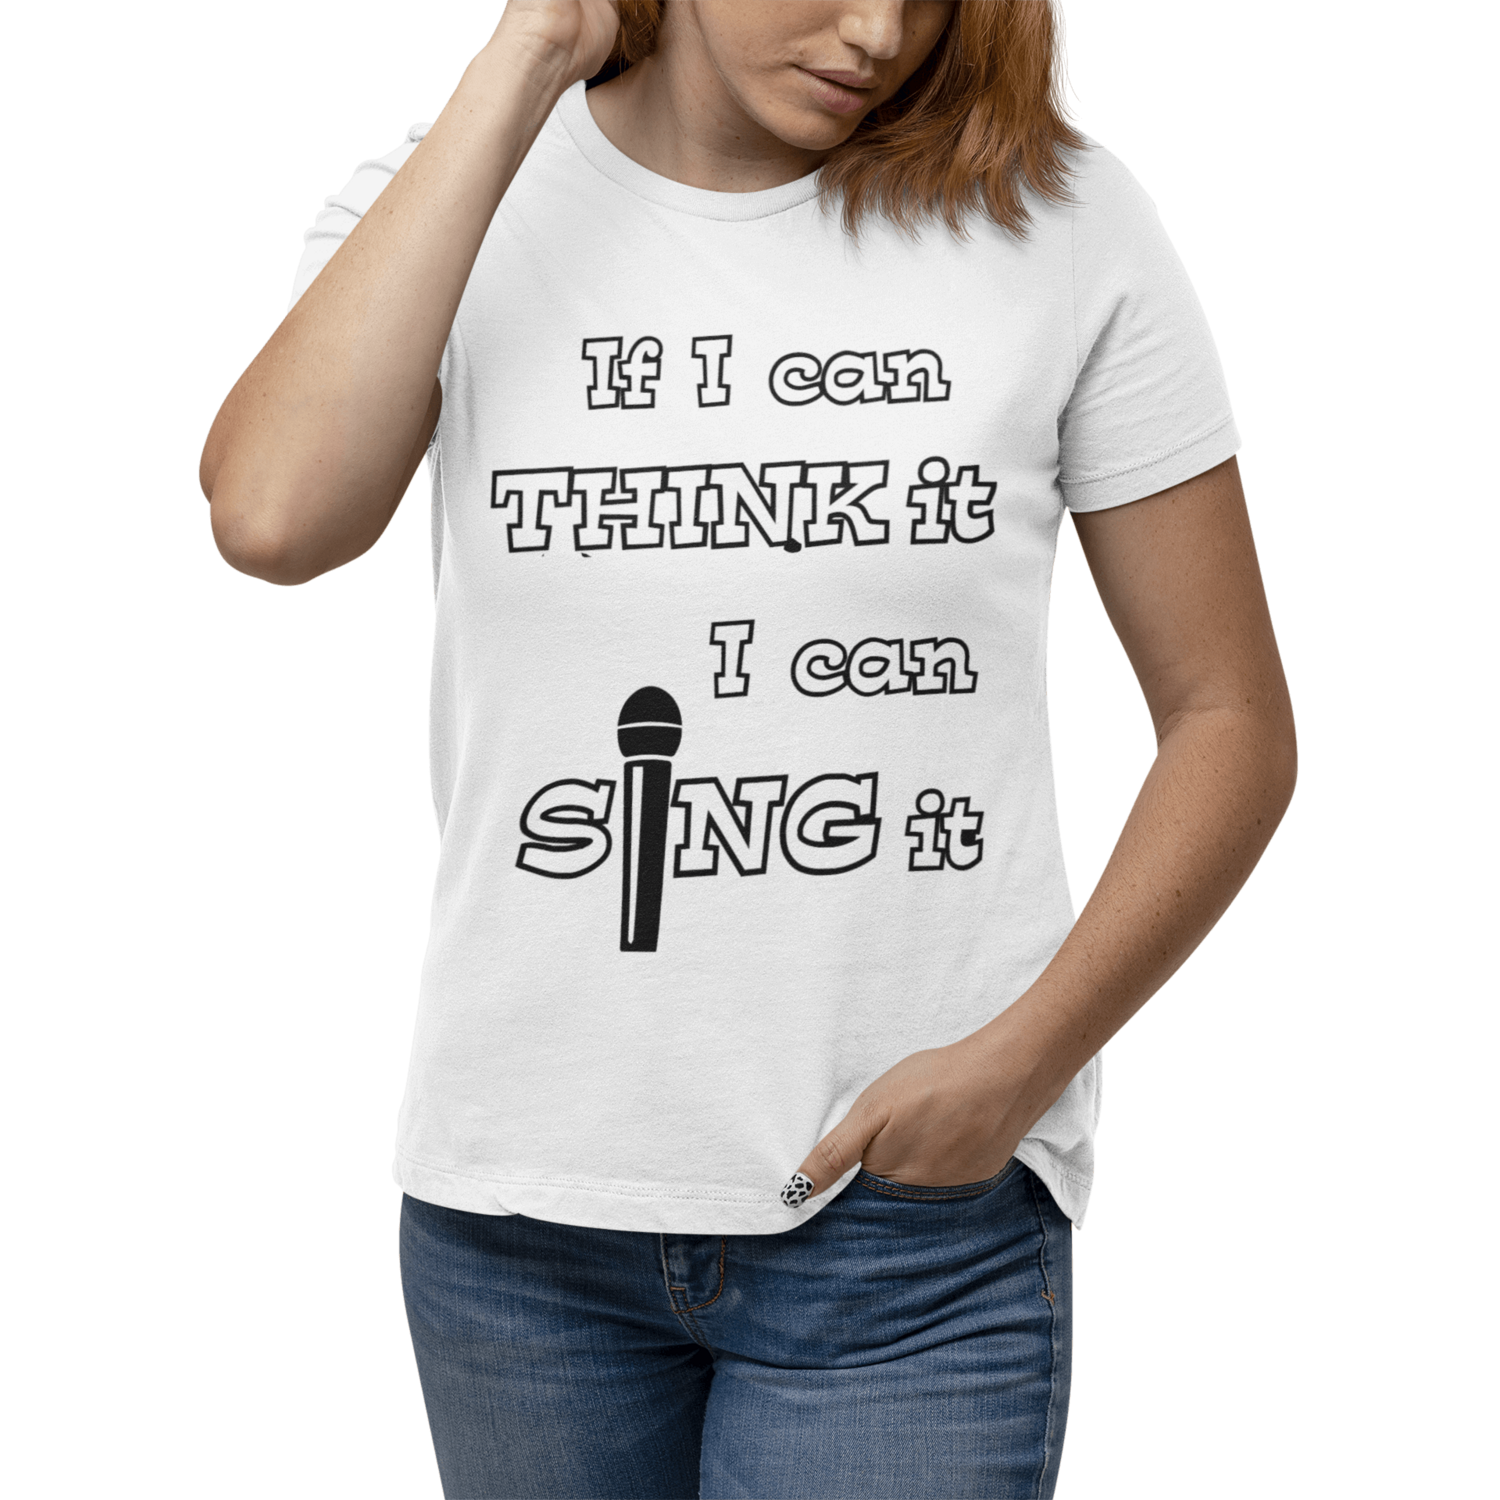 Women’s T-Shirt IF I CAN THINK IT, I CAN SING IT